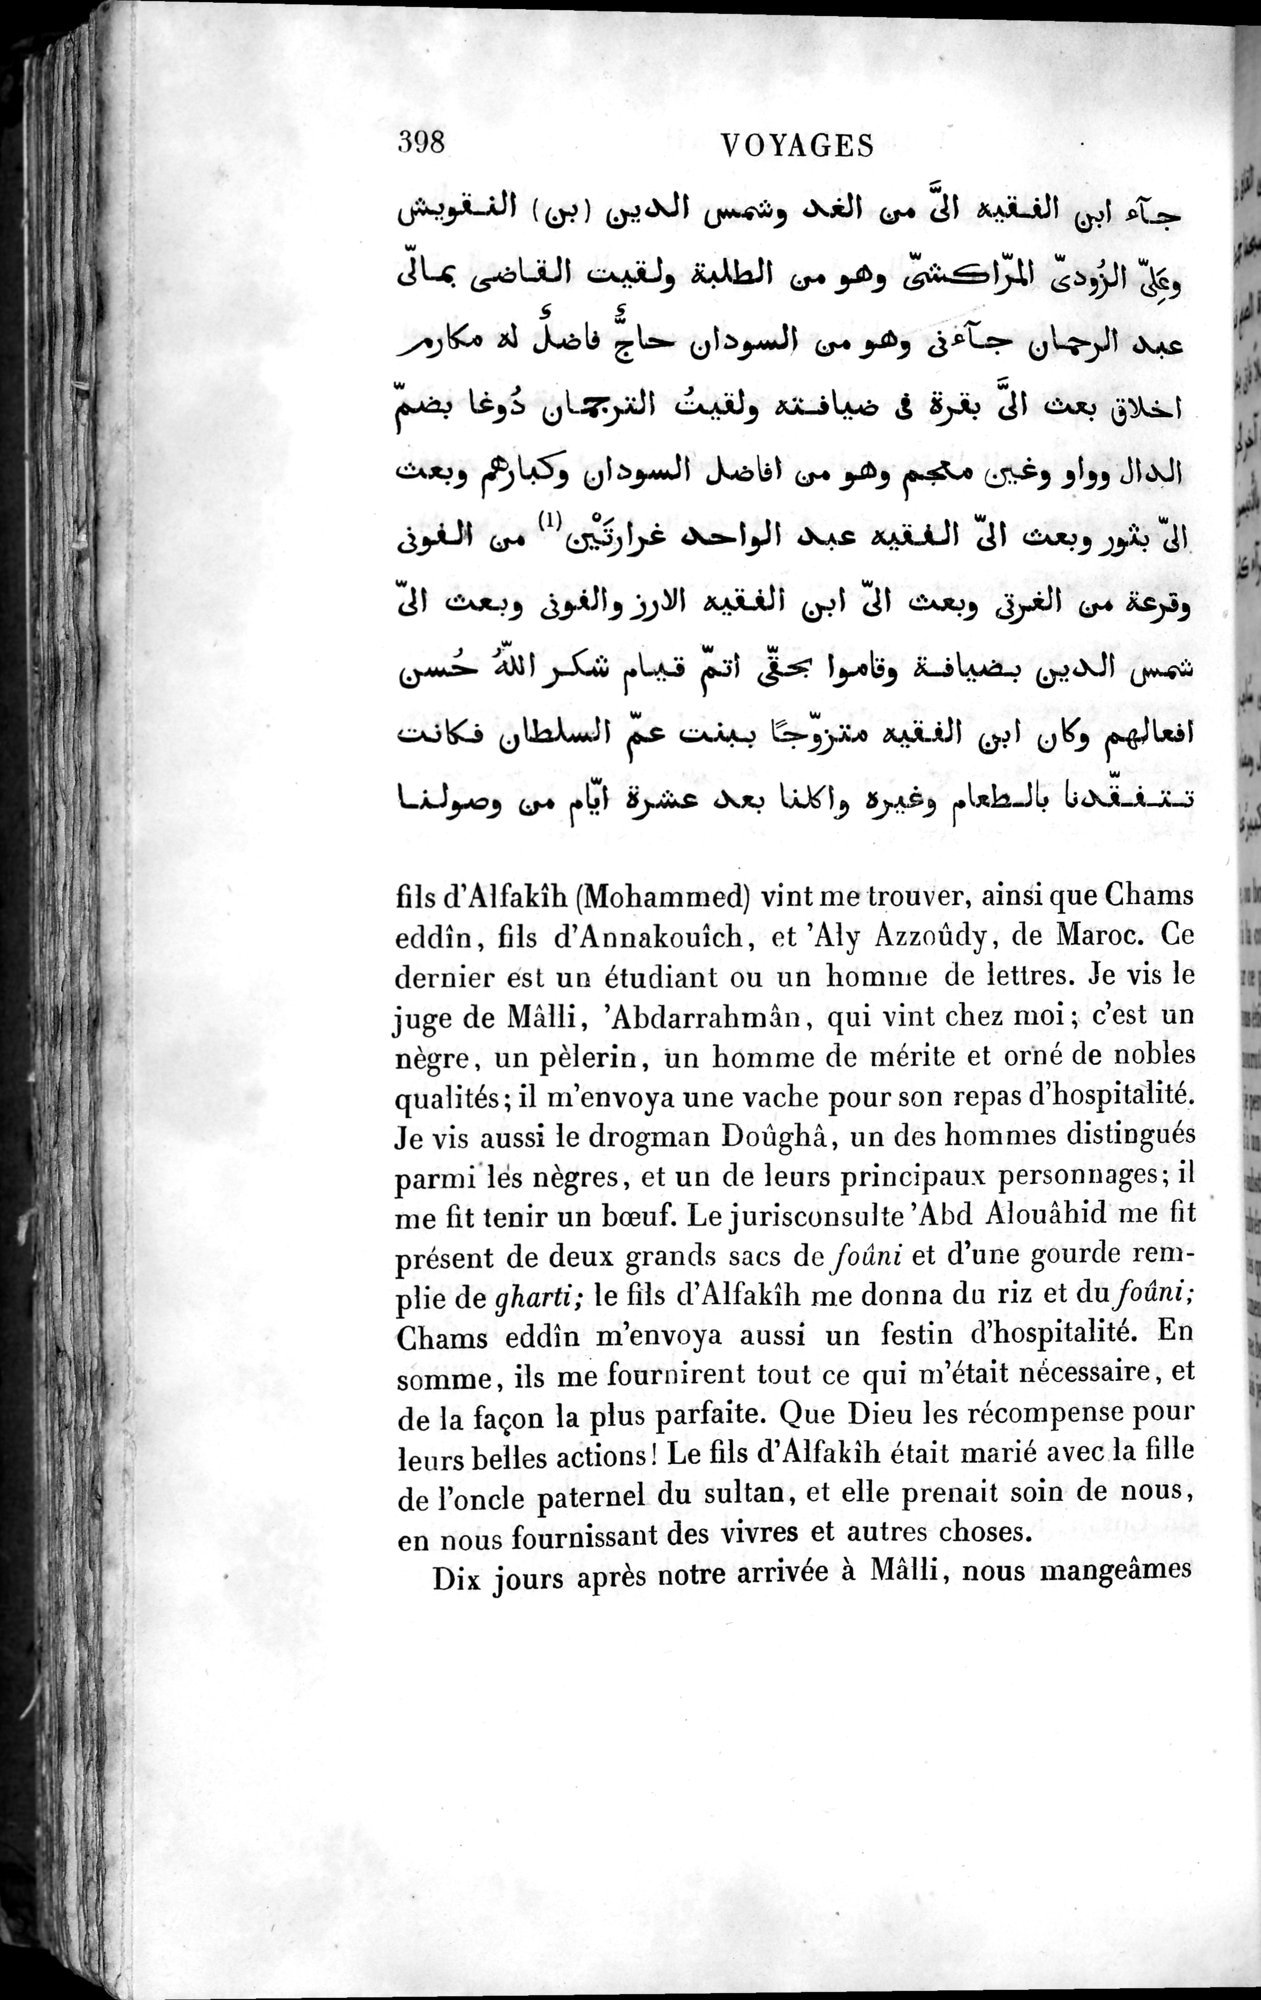 Voyages d'Ibn Batoutah : vol.4 / Page 410 (Grayscale High Resolution Image)